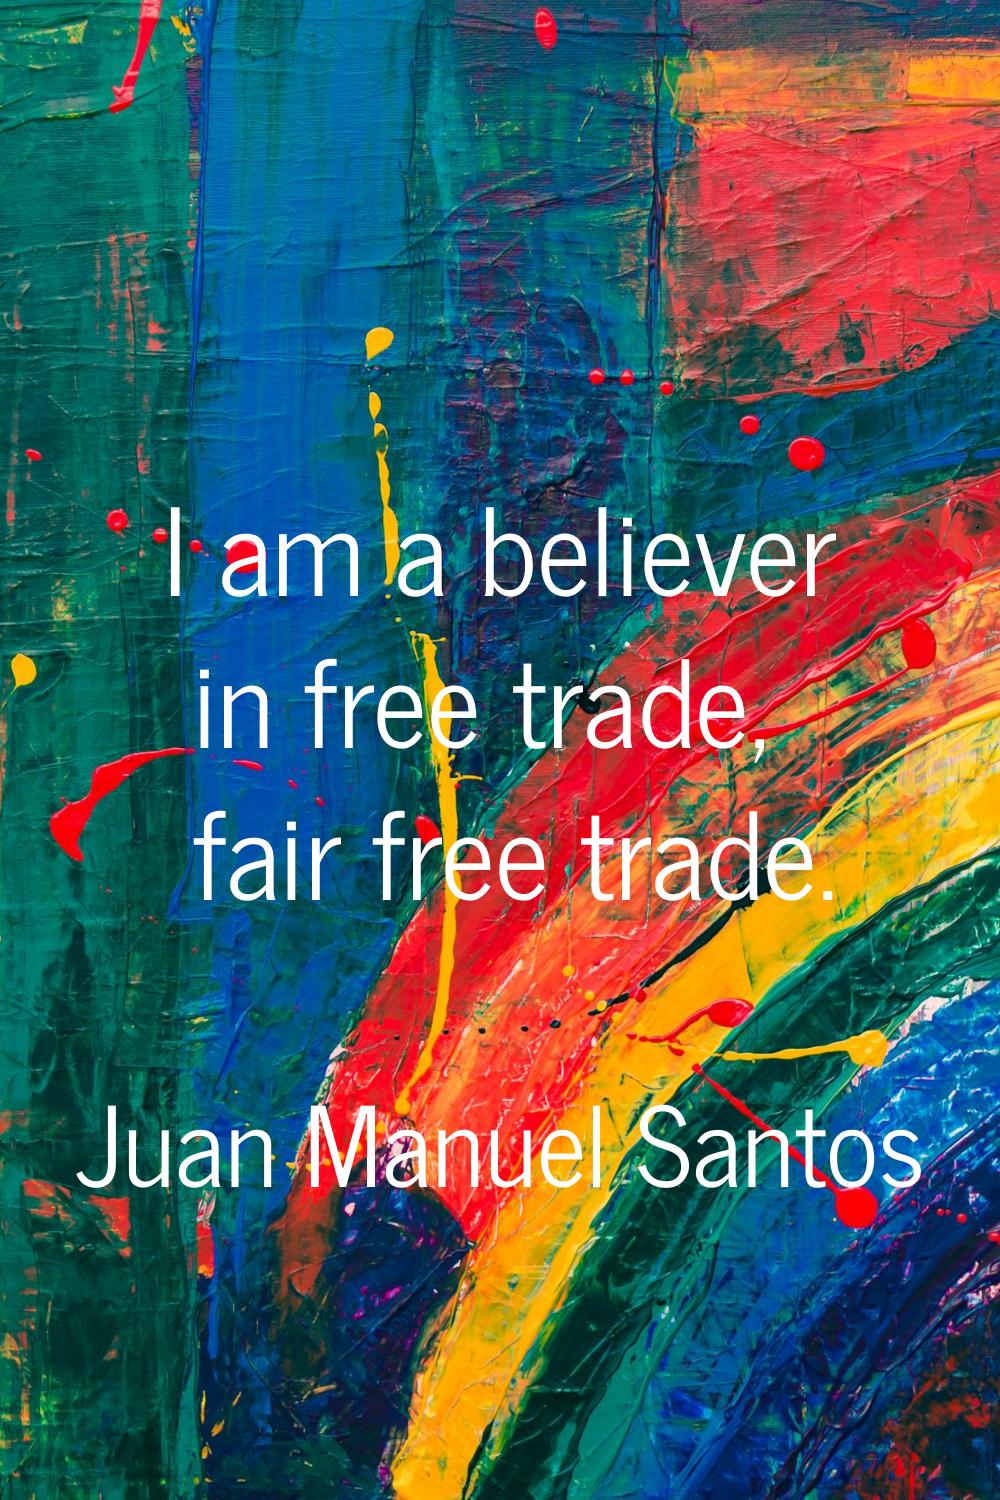 I am a believer in free trade, fair free trade.